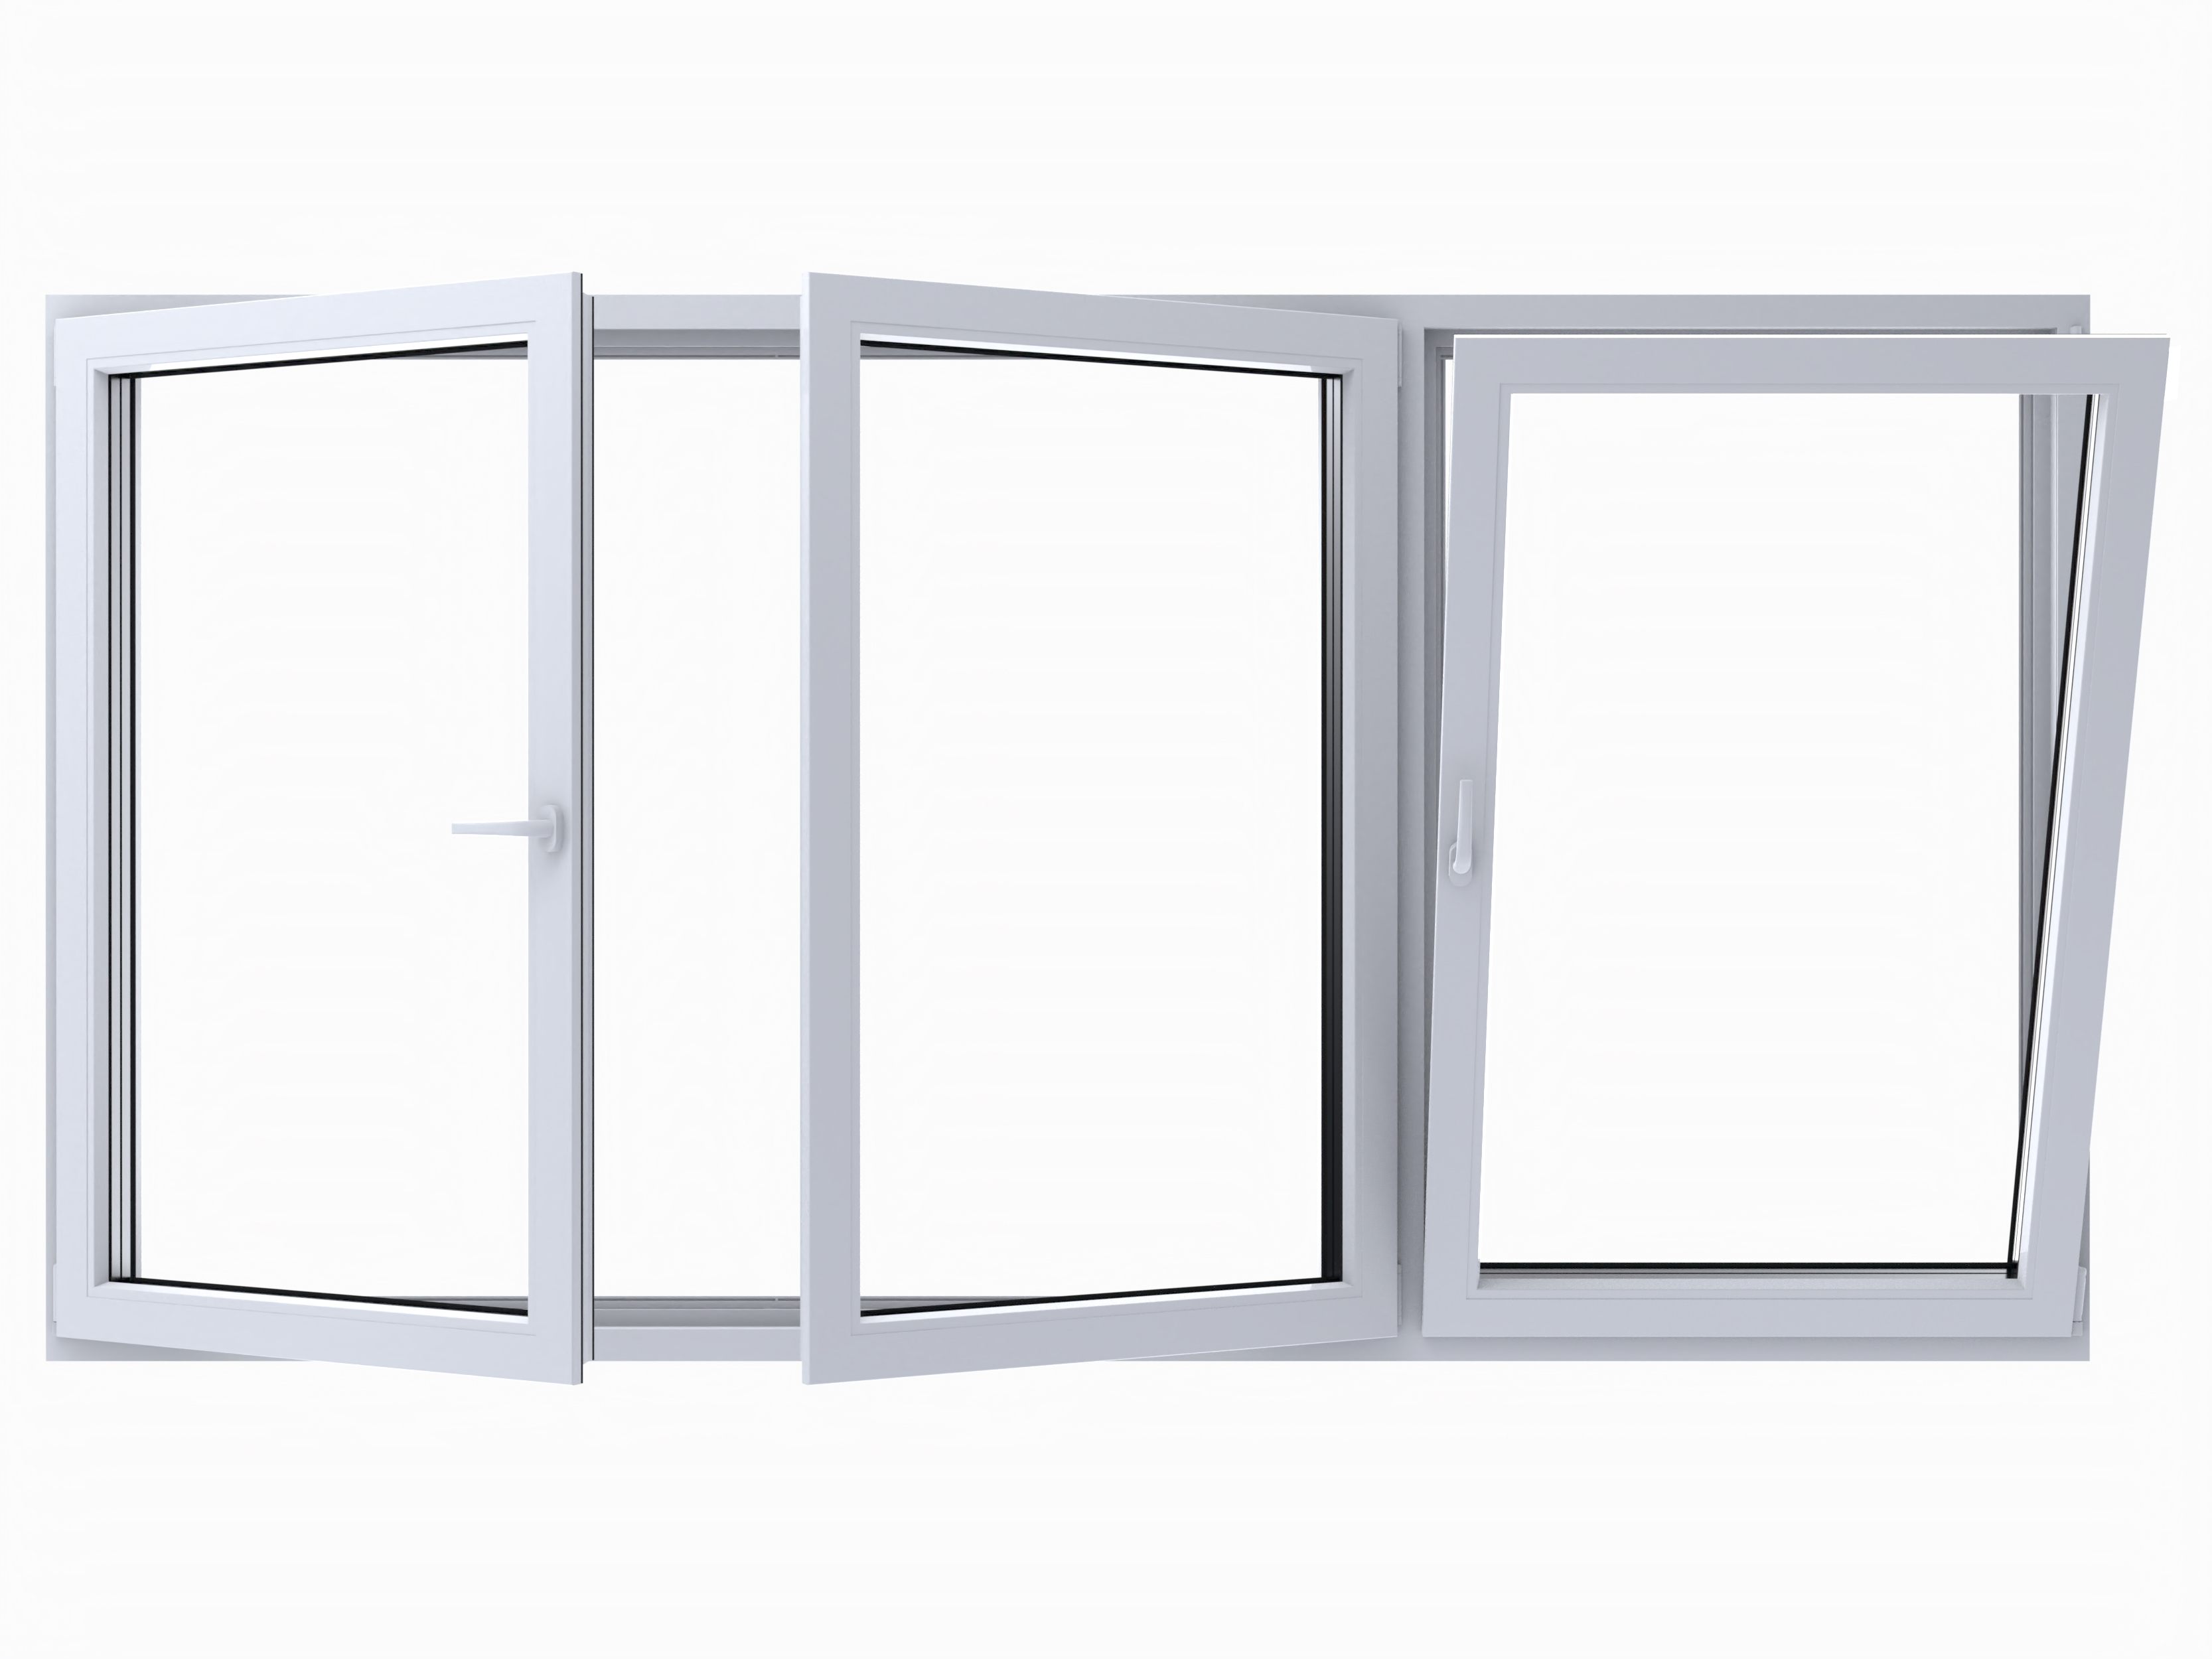 Window double glazed with two swinging parts and one swinging part